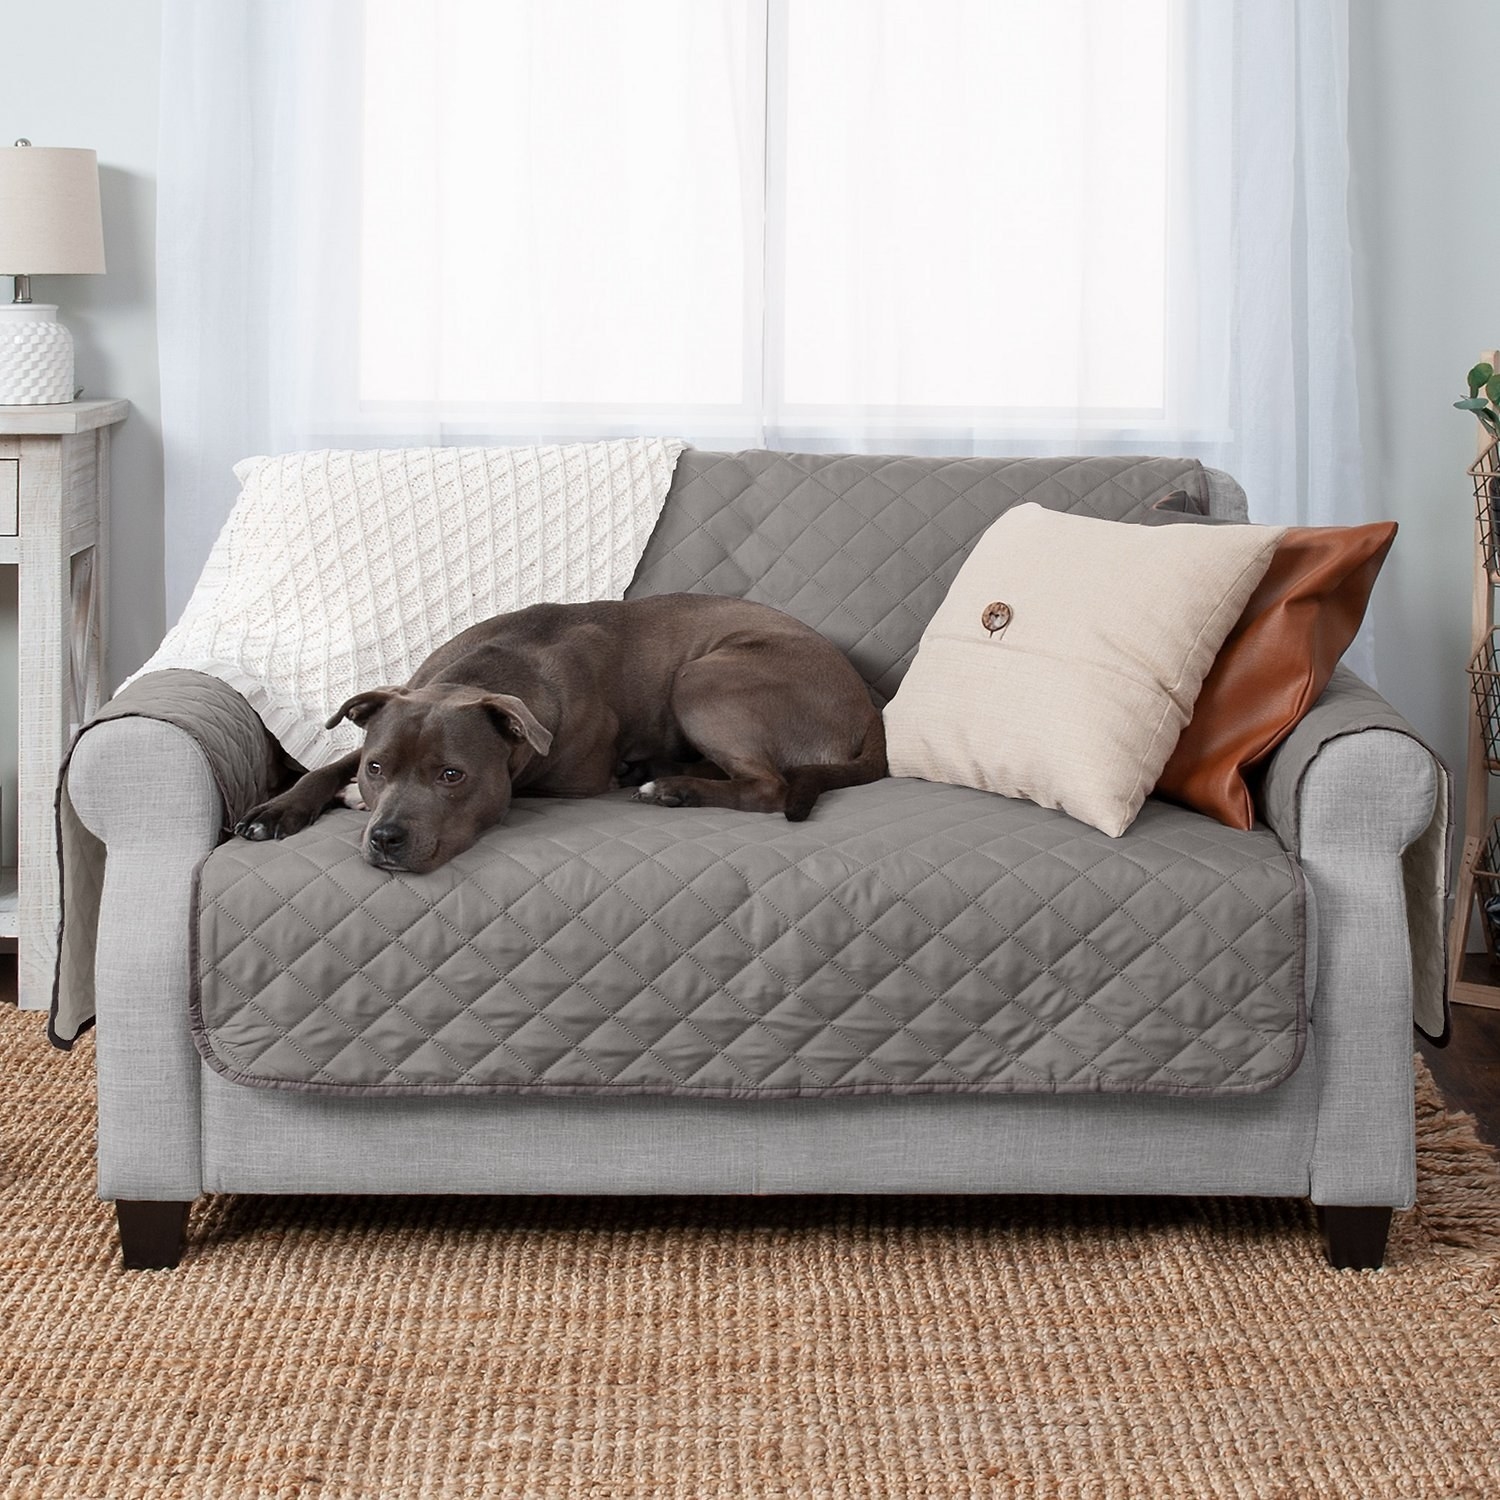 A dog sleeping on the loveseat protector in gray